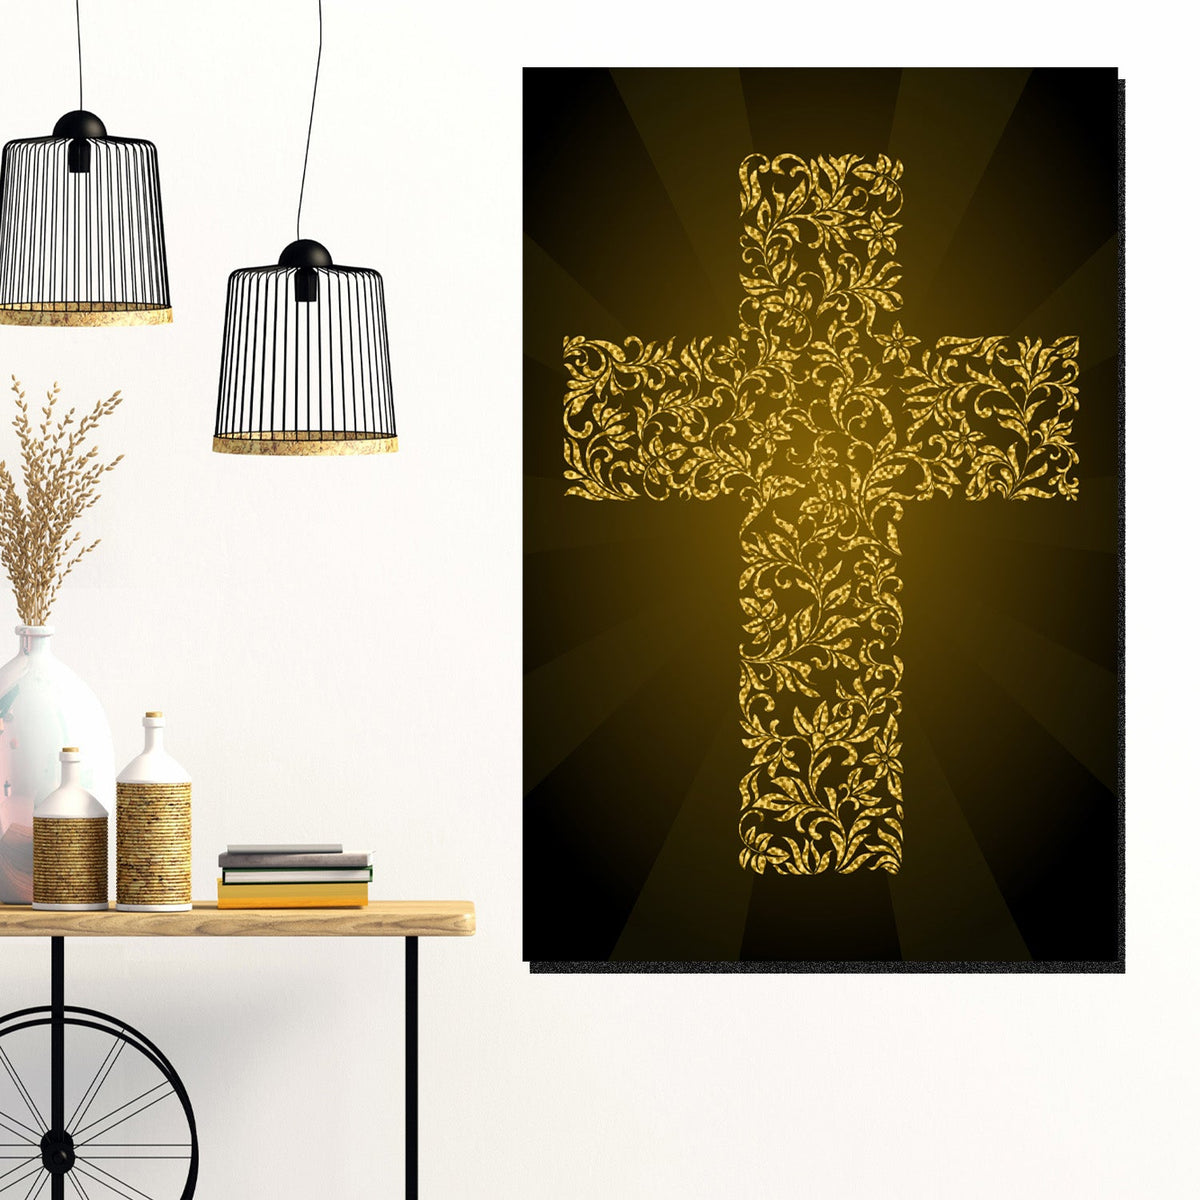 https://cdn.shopify.com/s/files/1/0387/9986/8044/products/GoldenCrossCanvasArtprintStretched-2.jpg